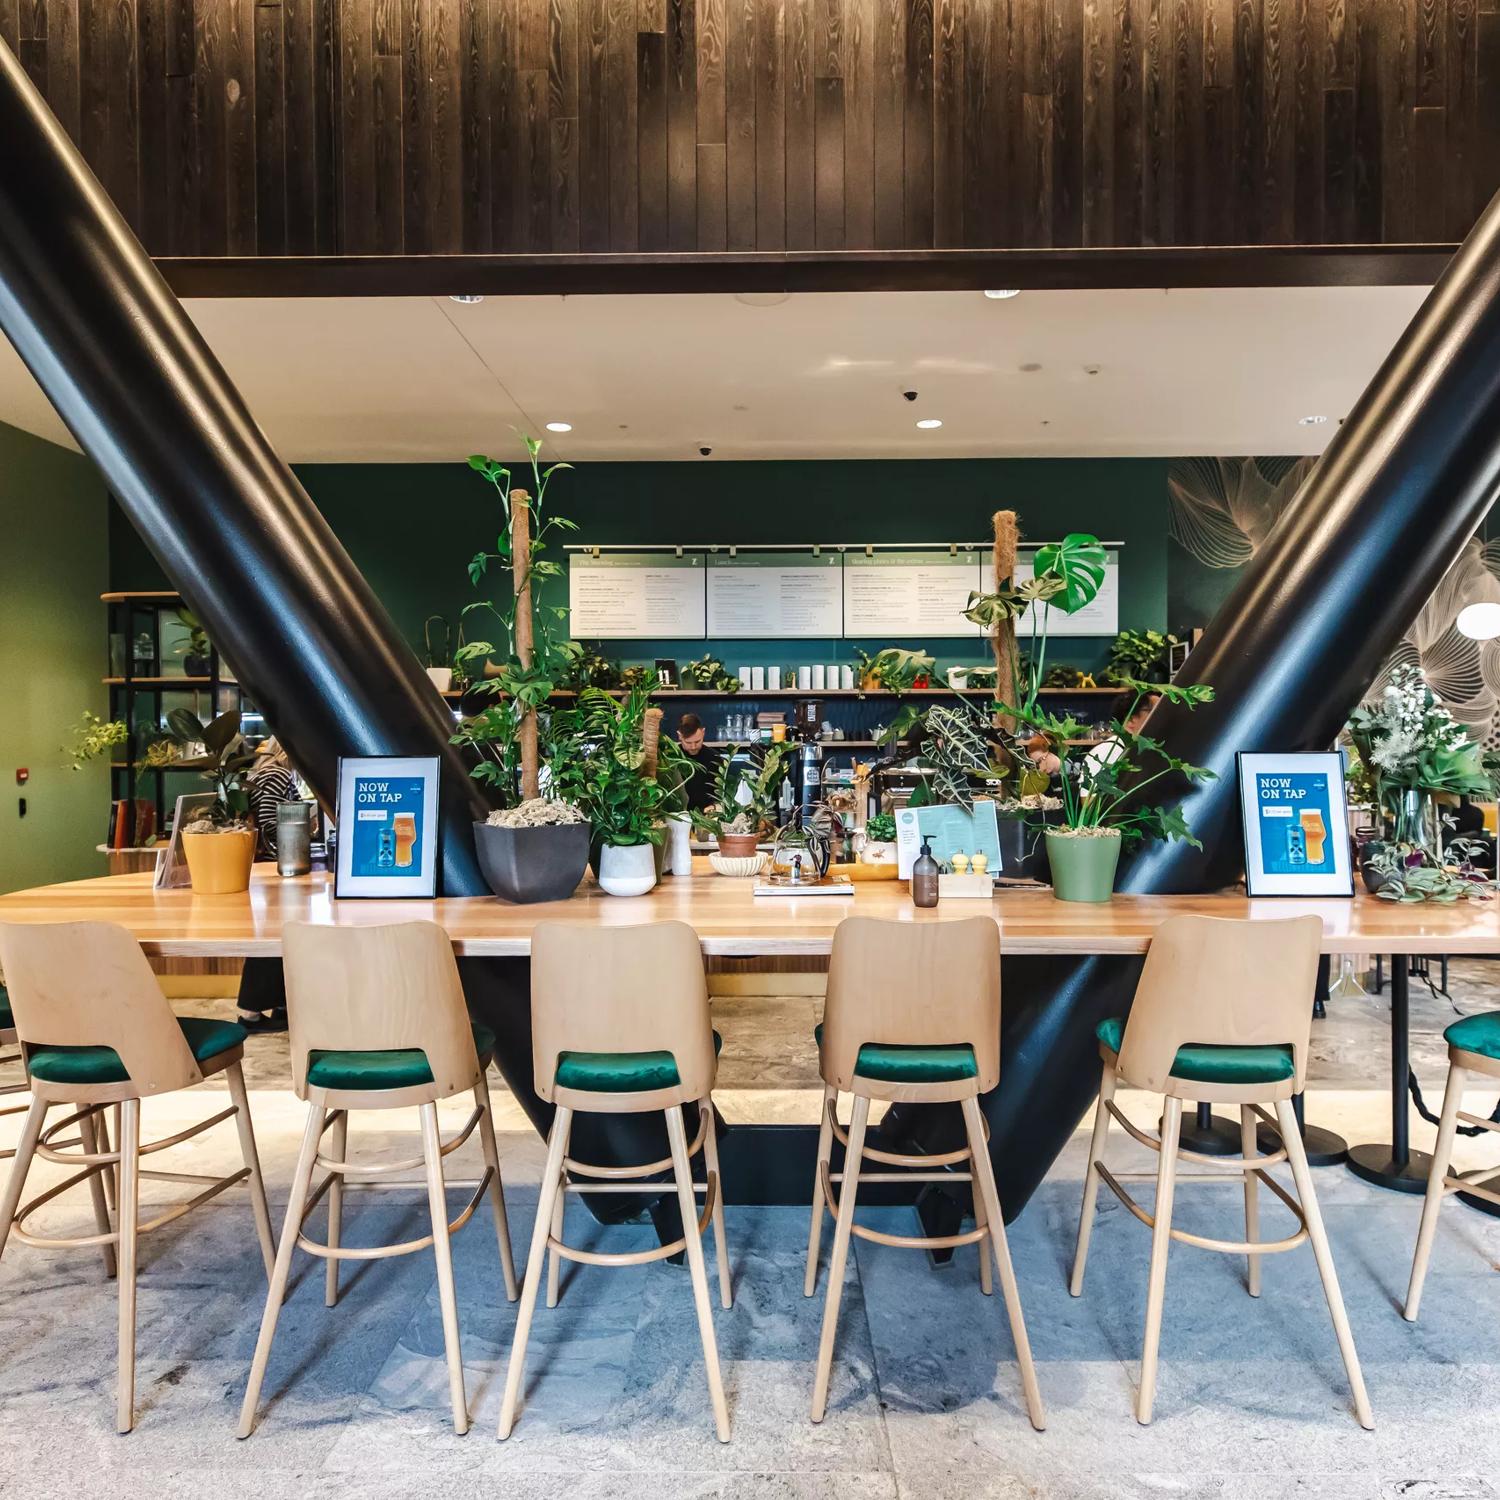 A high table at Zephyr café  in Tākina, with plants placed in the centre. The green wall and accents give the cafe a nature feeling.